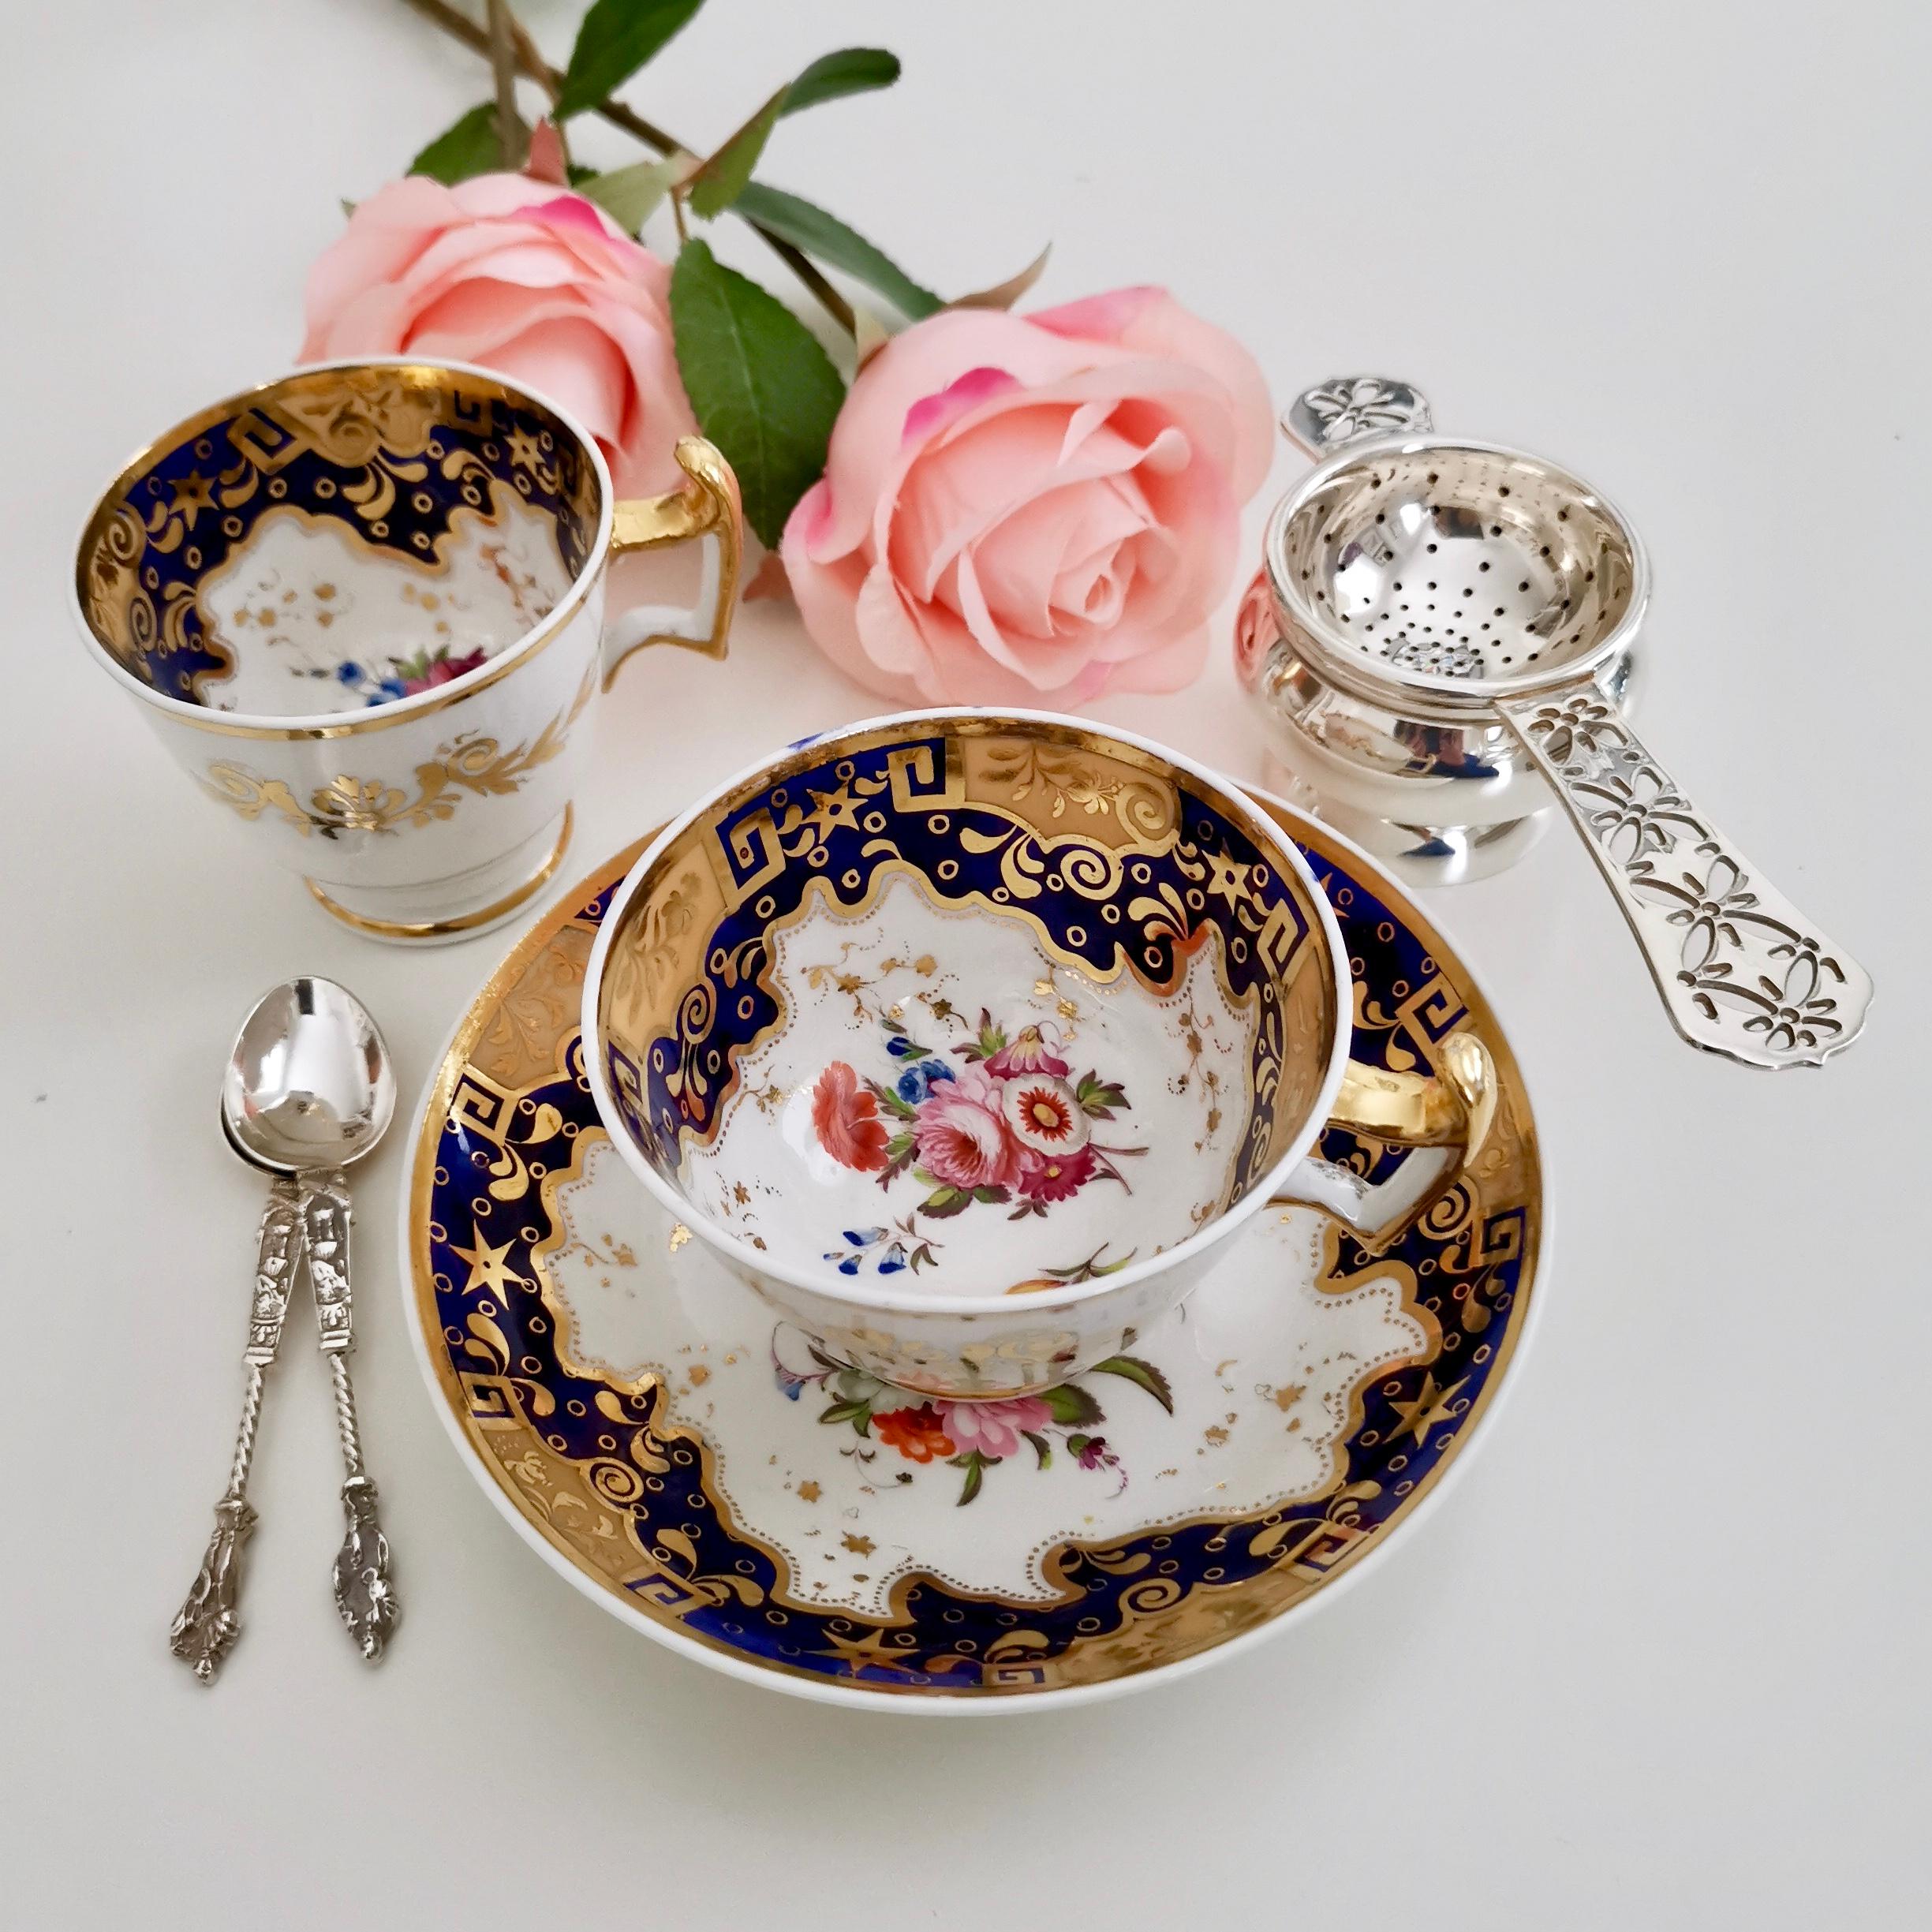 This is an exceptionally beautiful Ridgway trio made circa 1825, which is known as the Regency period. The shape of the cup handle is typical for its time and is called the 